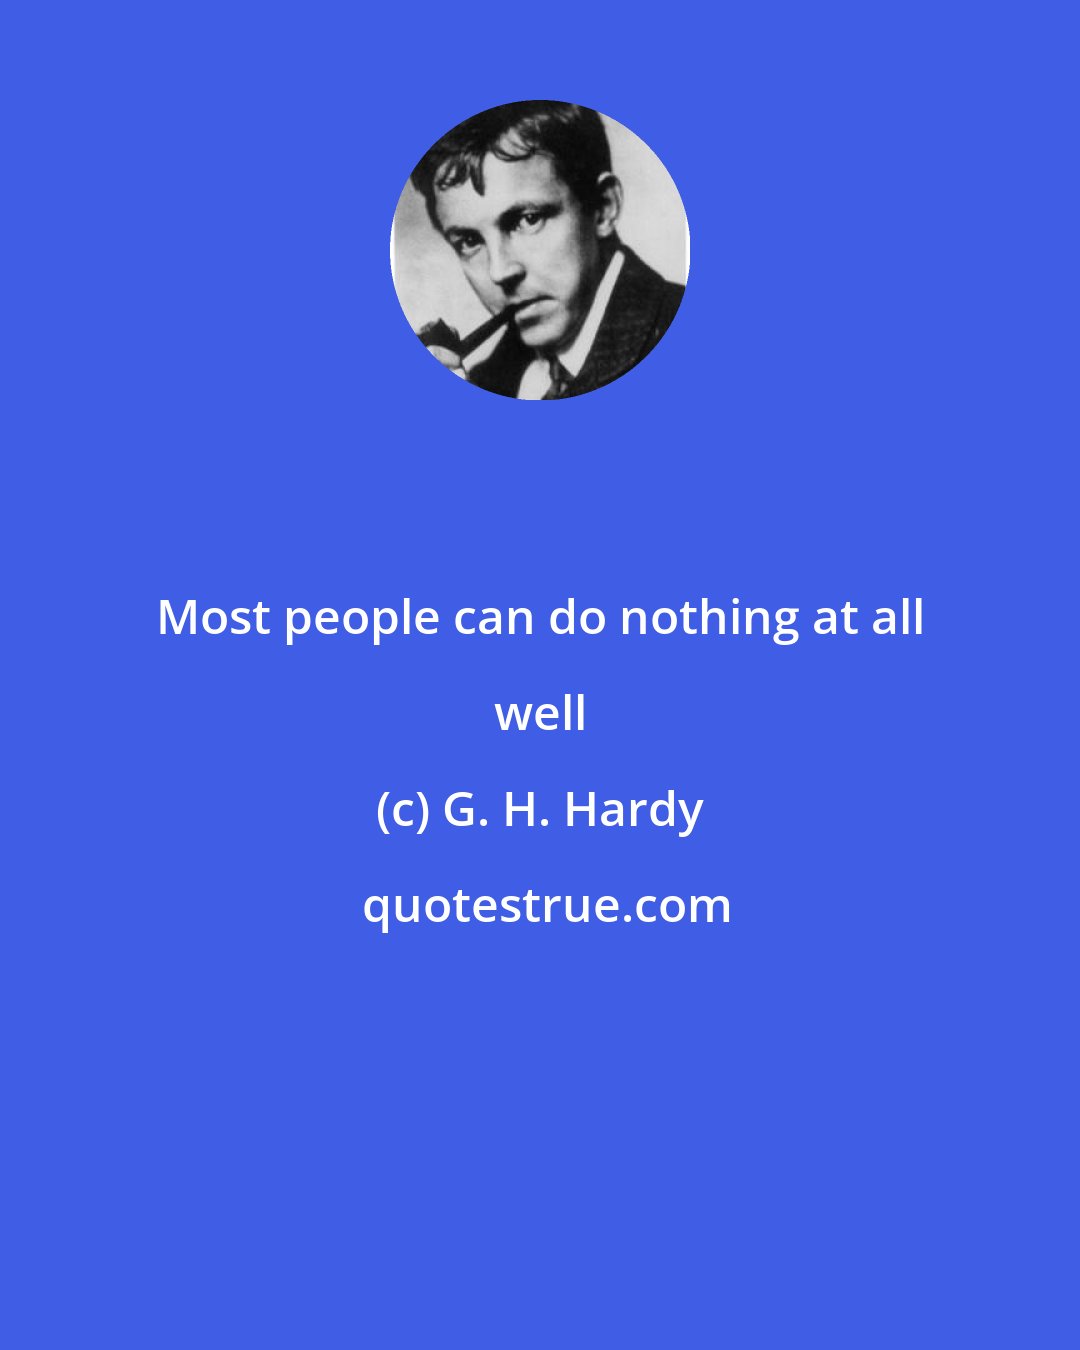 G. H. Hardy: Most people can do nothing at all well